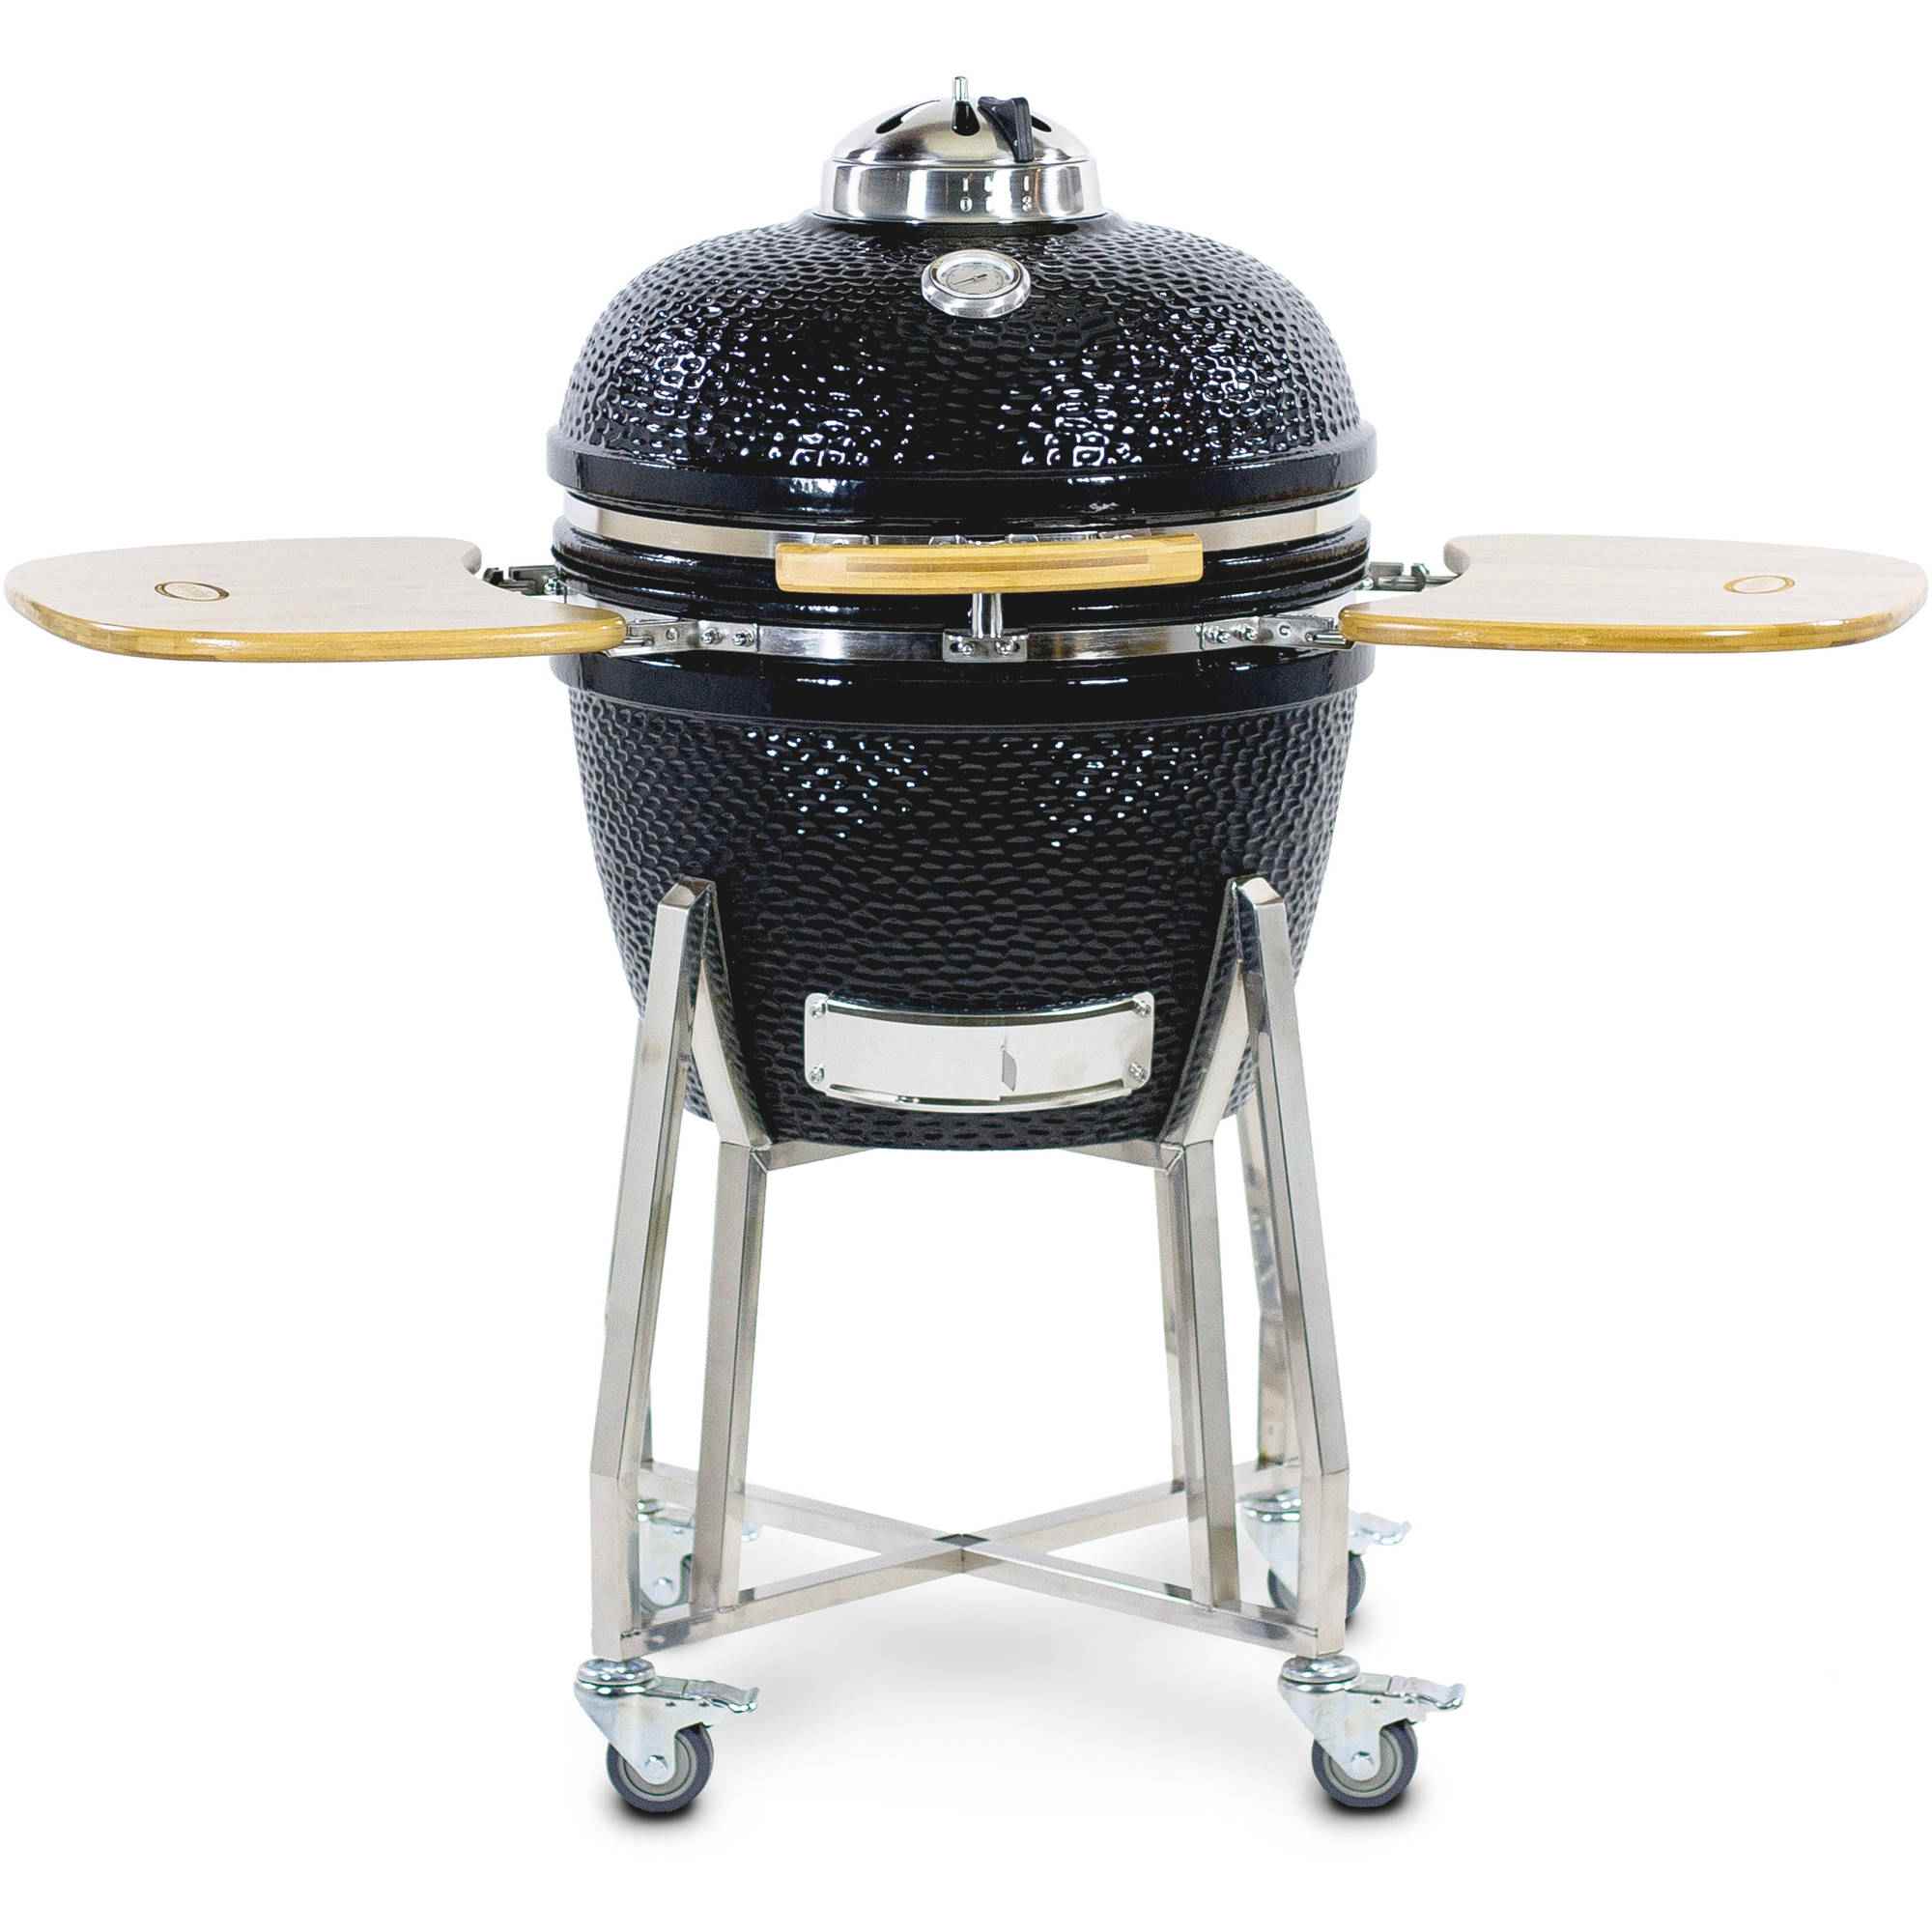 The 9 Best Kamado Grills and Smokers to Buy in 2018